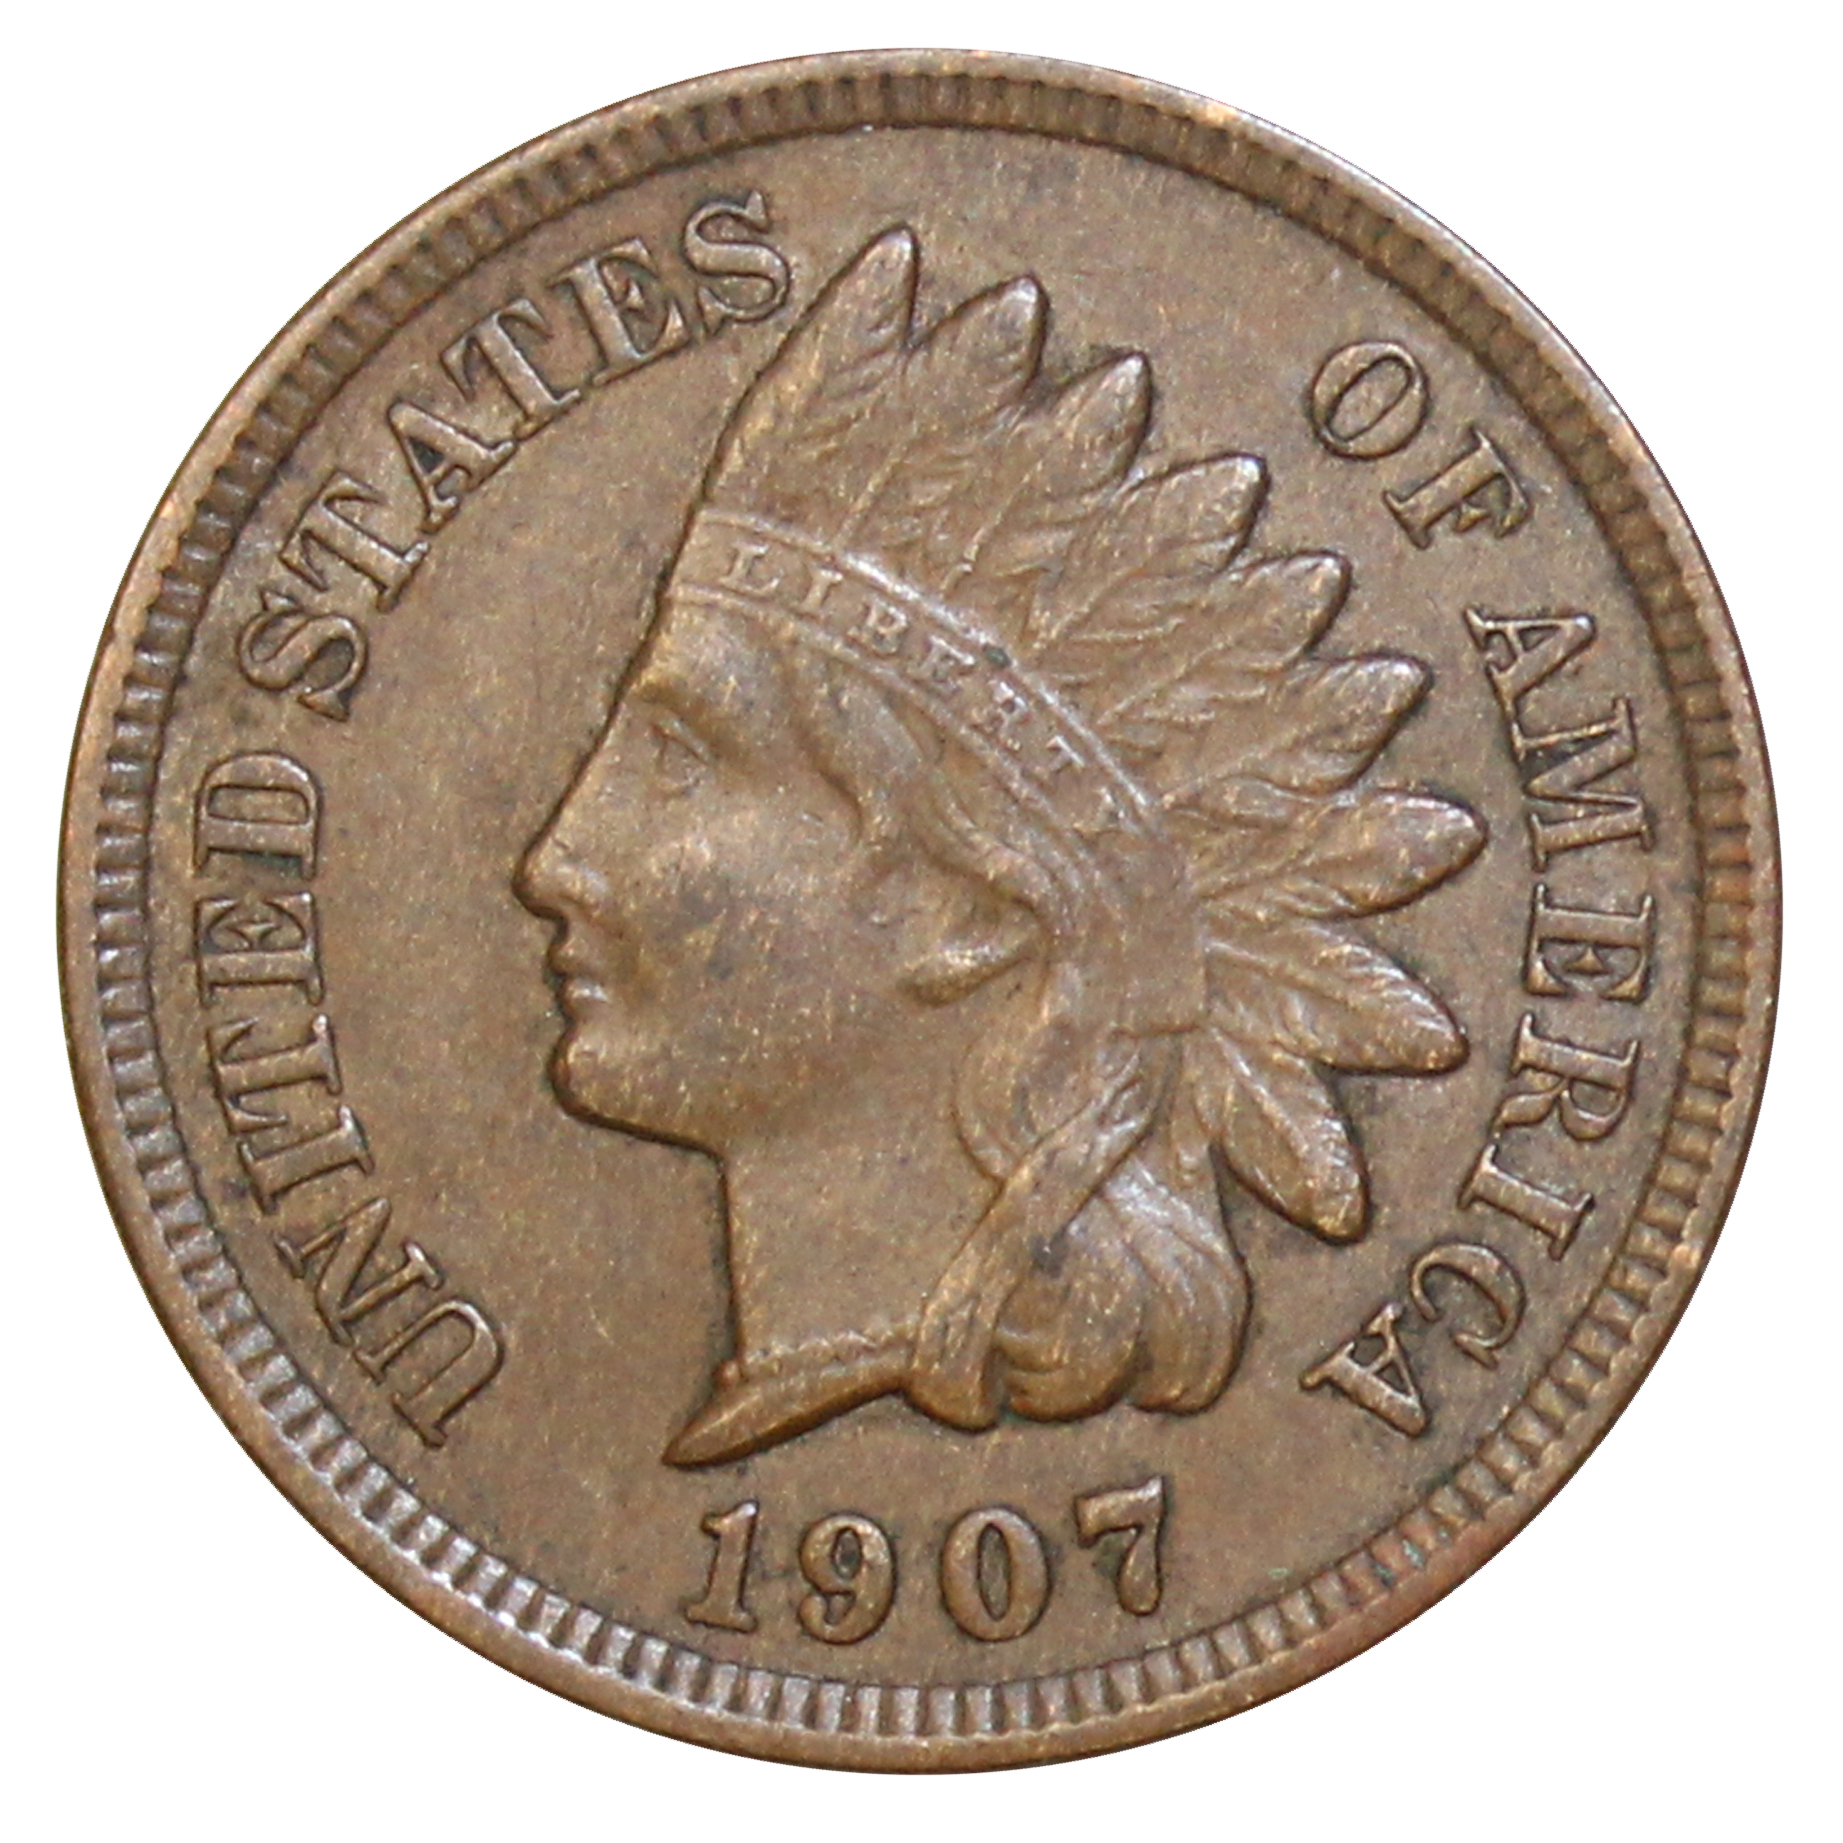 1907 1c Indian Head Cent Penny US Coin XF EF Extremely Fine